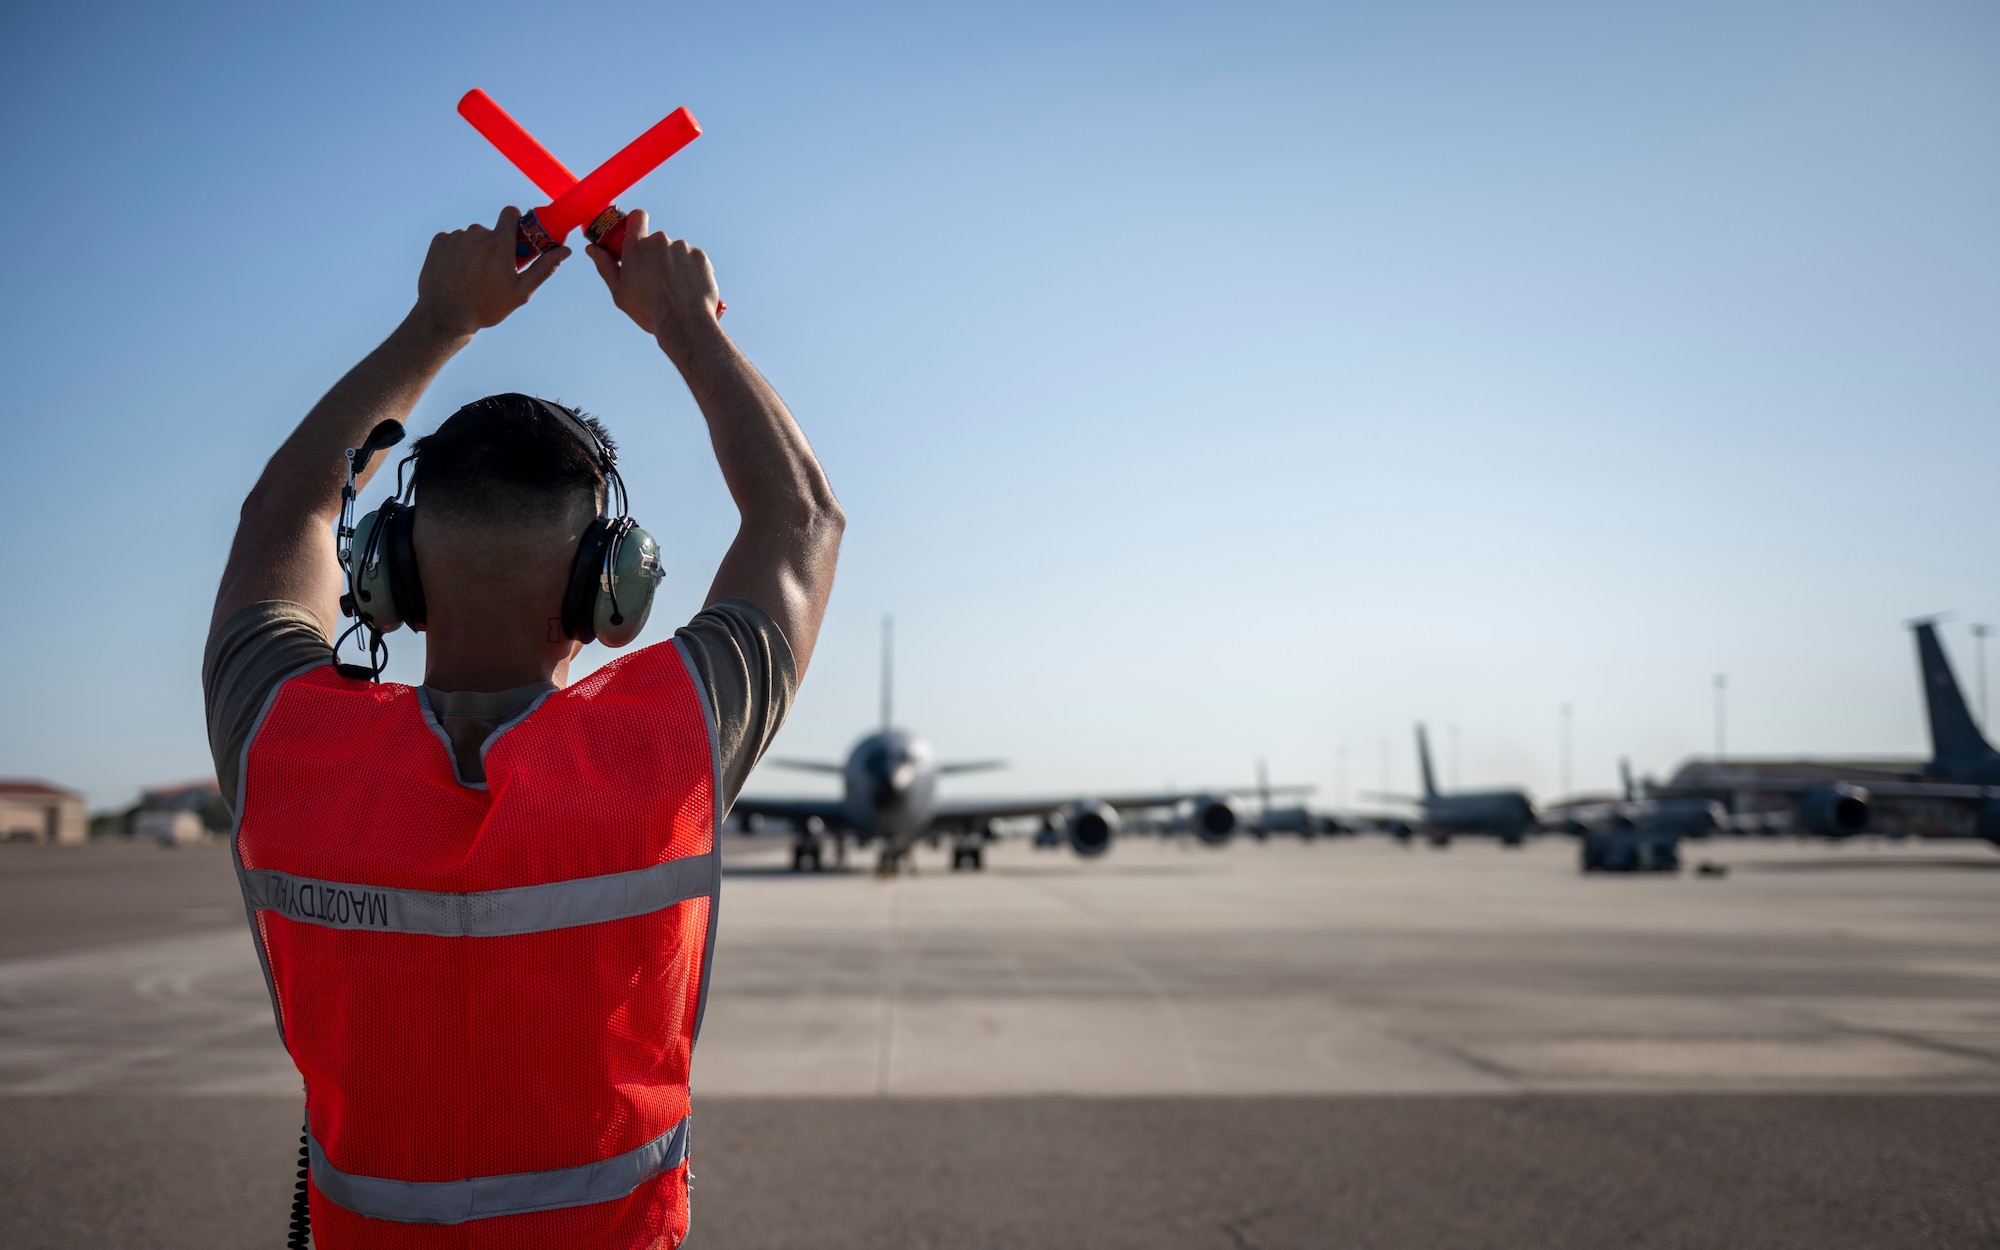 A crew chief with the 6th Maintenance Group marshals a KC-135 Stratotanker during Operation Violent Storm at MacDill Air Force Base, Florida, April 26, 2023. The exercise consisted of an “elephant walk,” with 18 KC-135 Stratotanker aircraft mobilizing through the efforts of more than 700 personnel from across the installation, all in under six hours. (U.S. Air Force photo by Senior Airman Lauren Cobin)